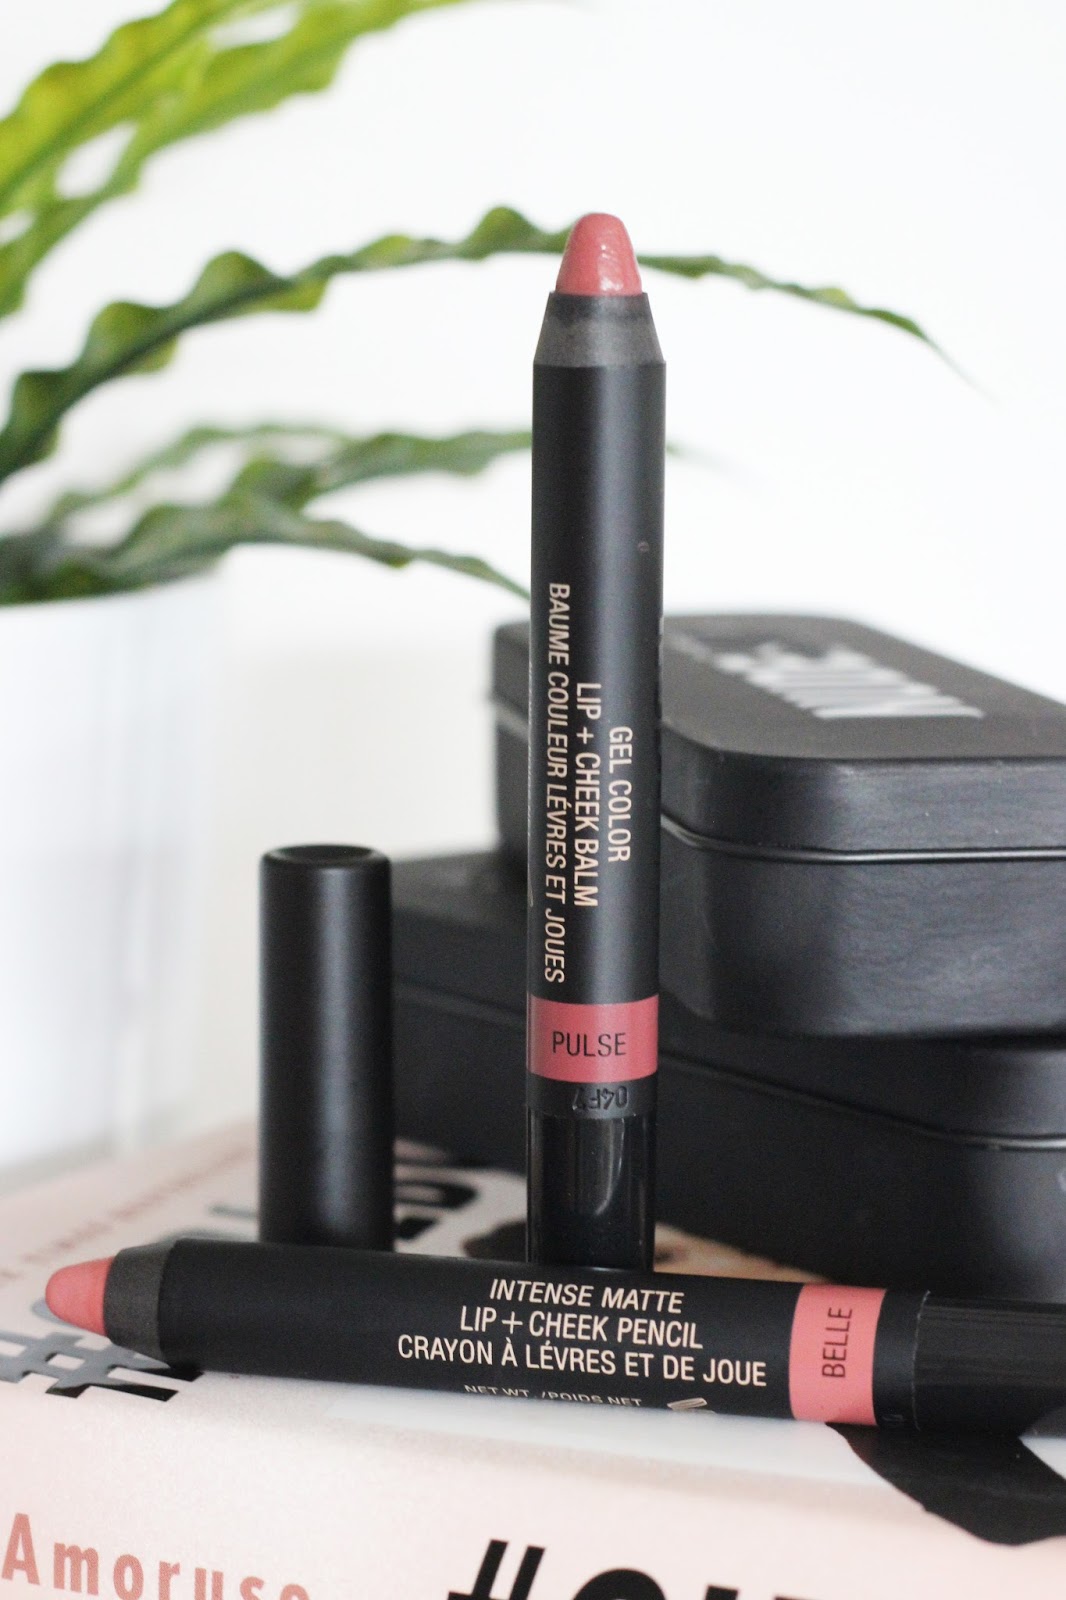 NUDESTIX Lip + Cheek Pencil Belle and Pulse | Review & Swatches